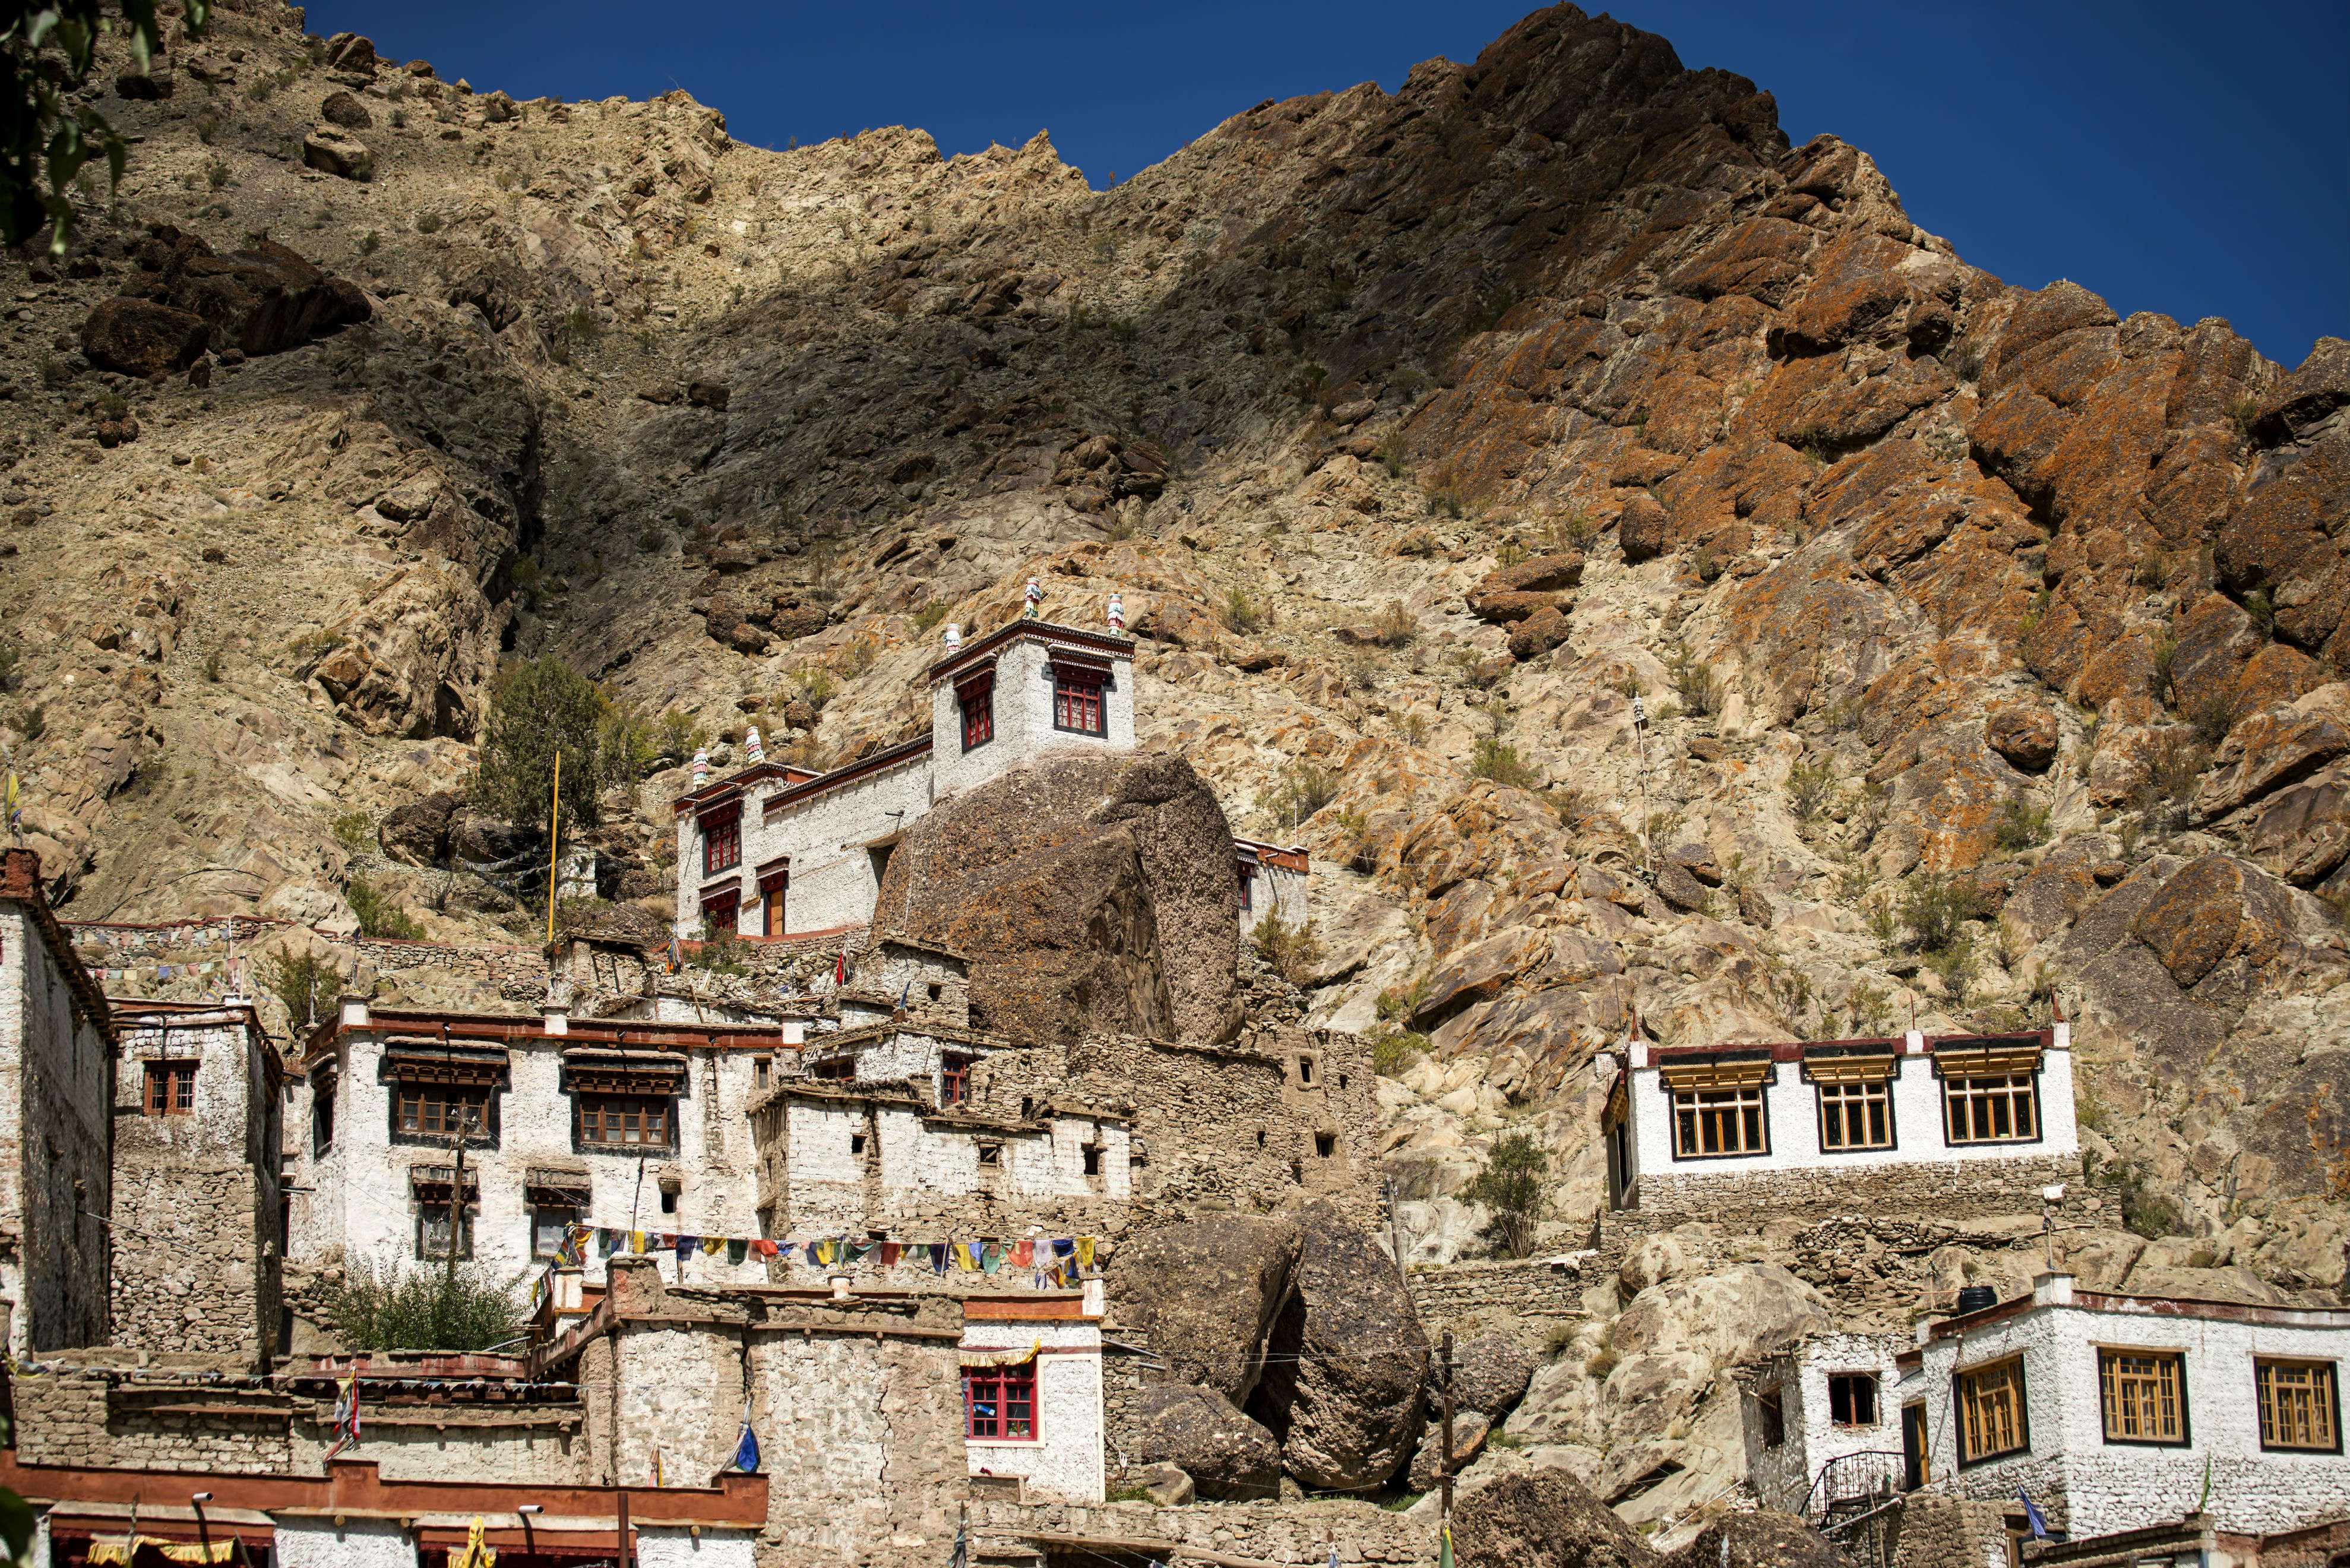 Ladakh’s secret – a Russian journalist, an Indian monk, and the lost years of Jesus Christ